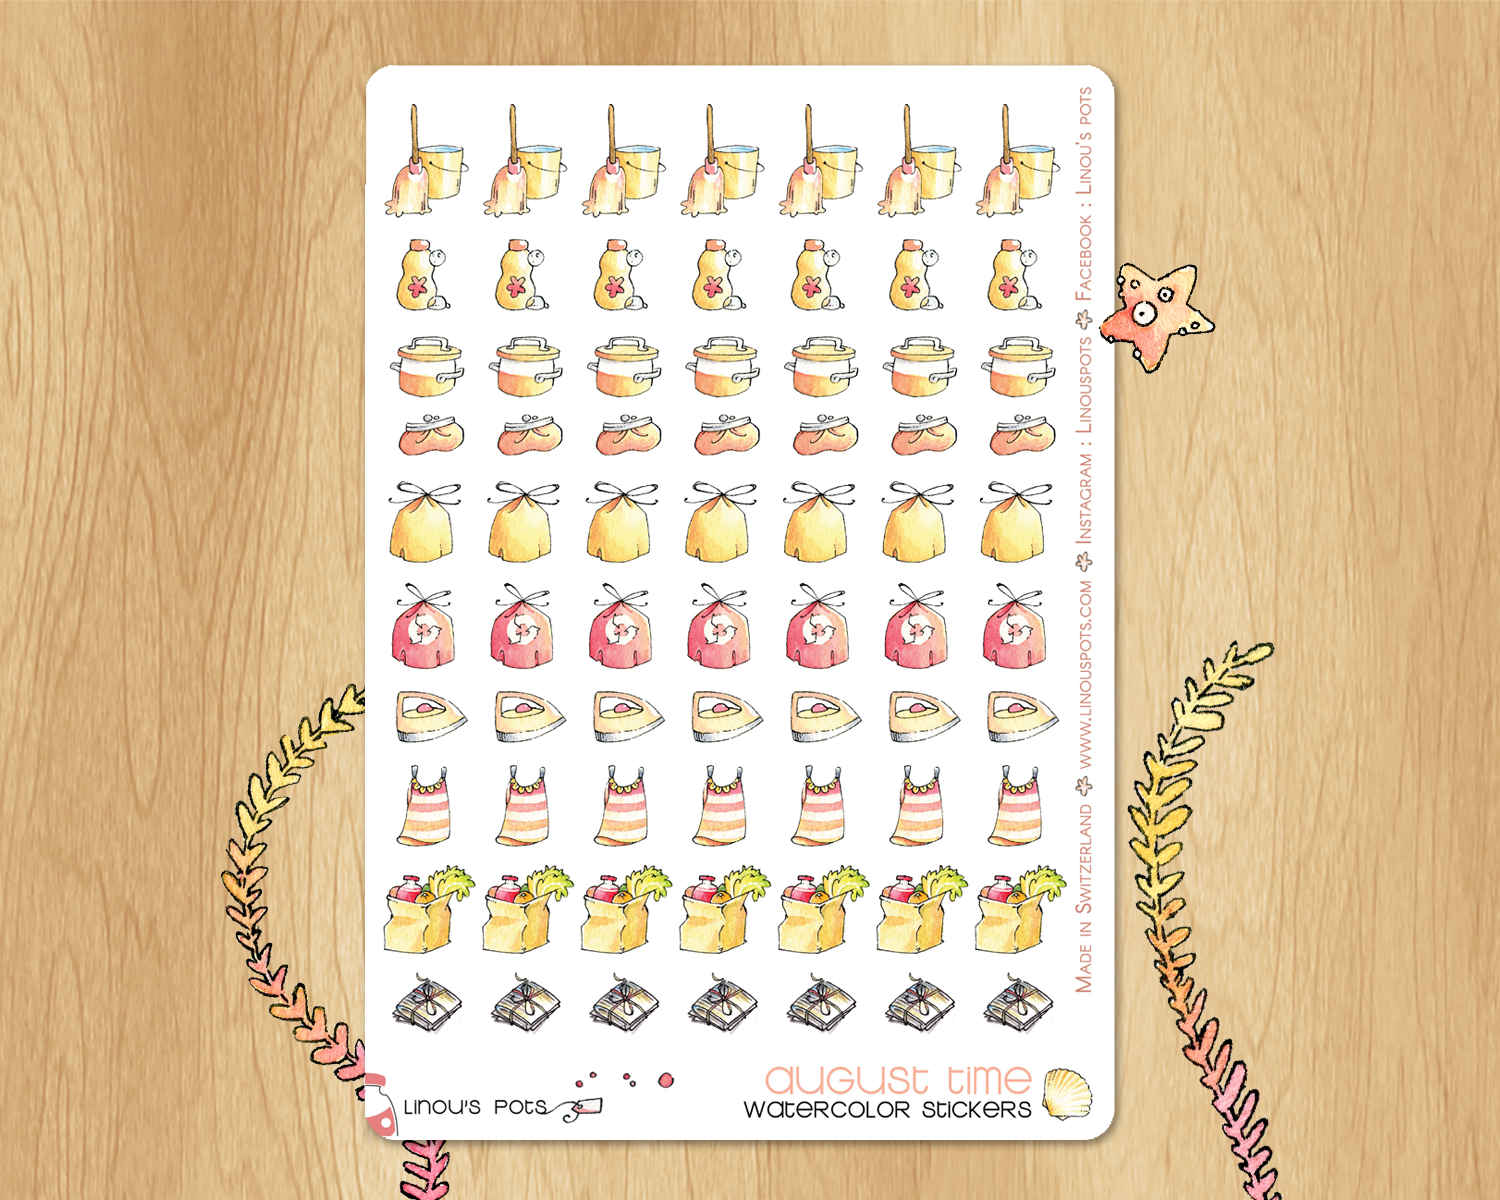 House chores watercolor stickers with summer vibes